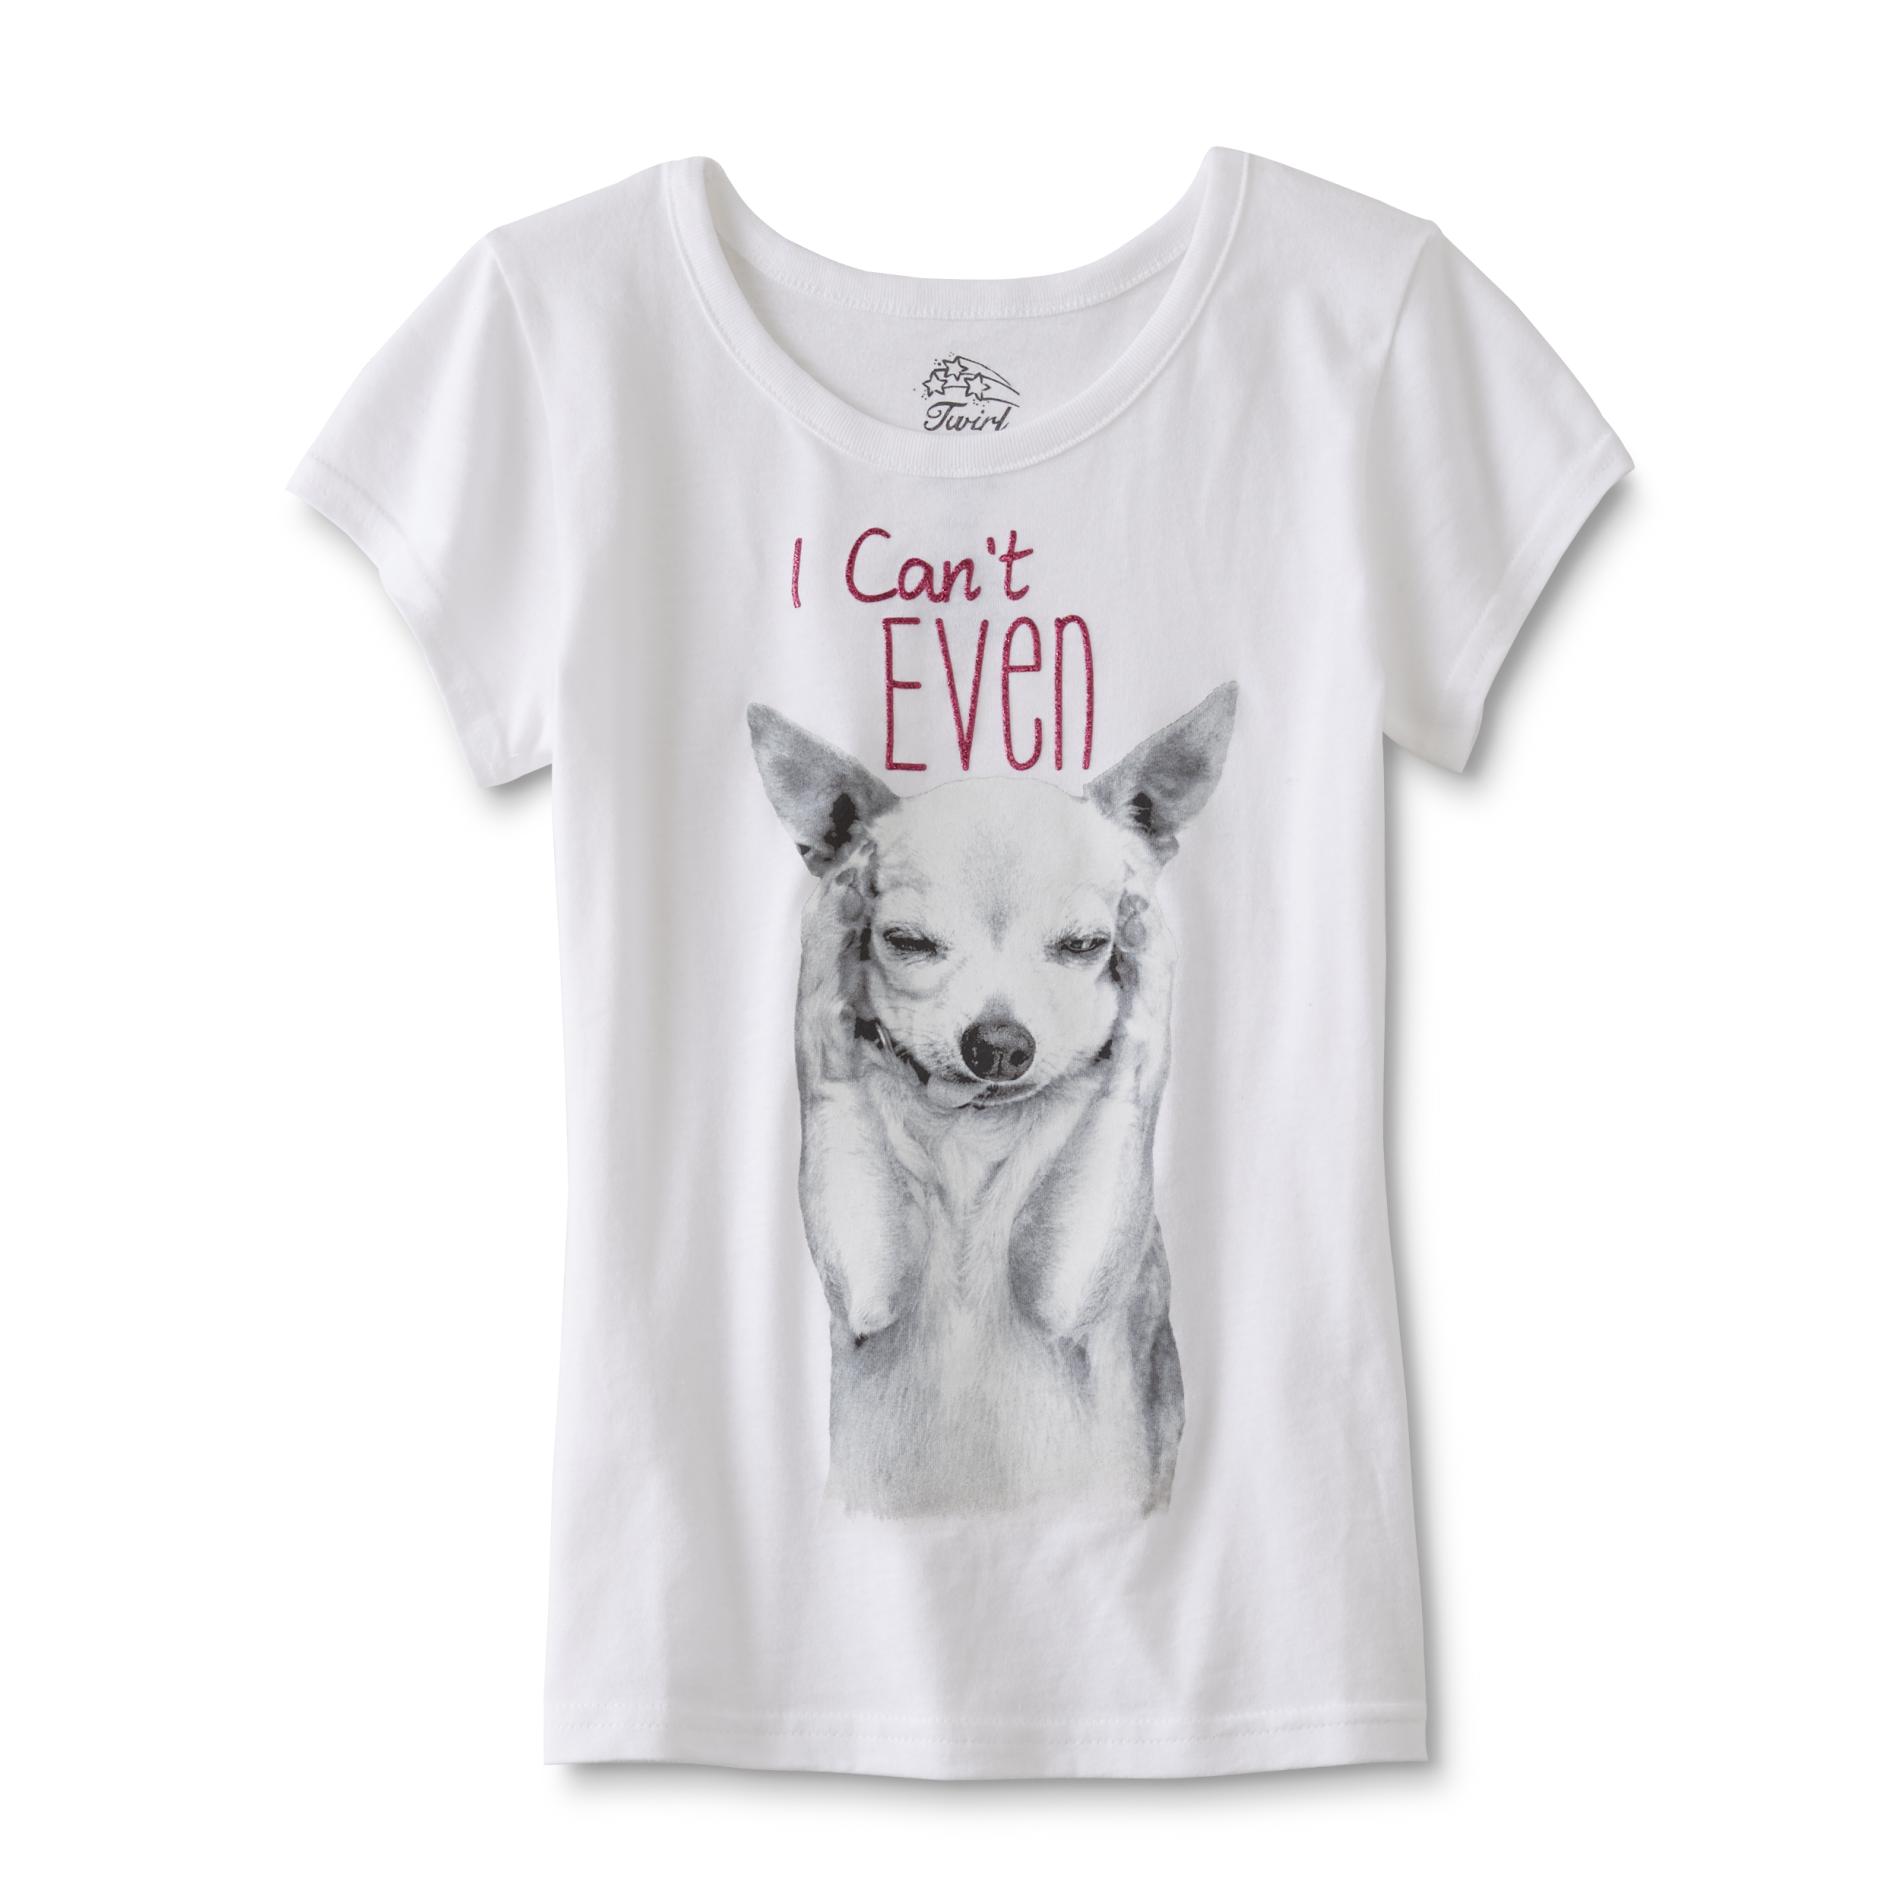 Girls' Graphic T-Shirt - I Can't Even